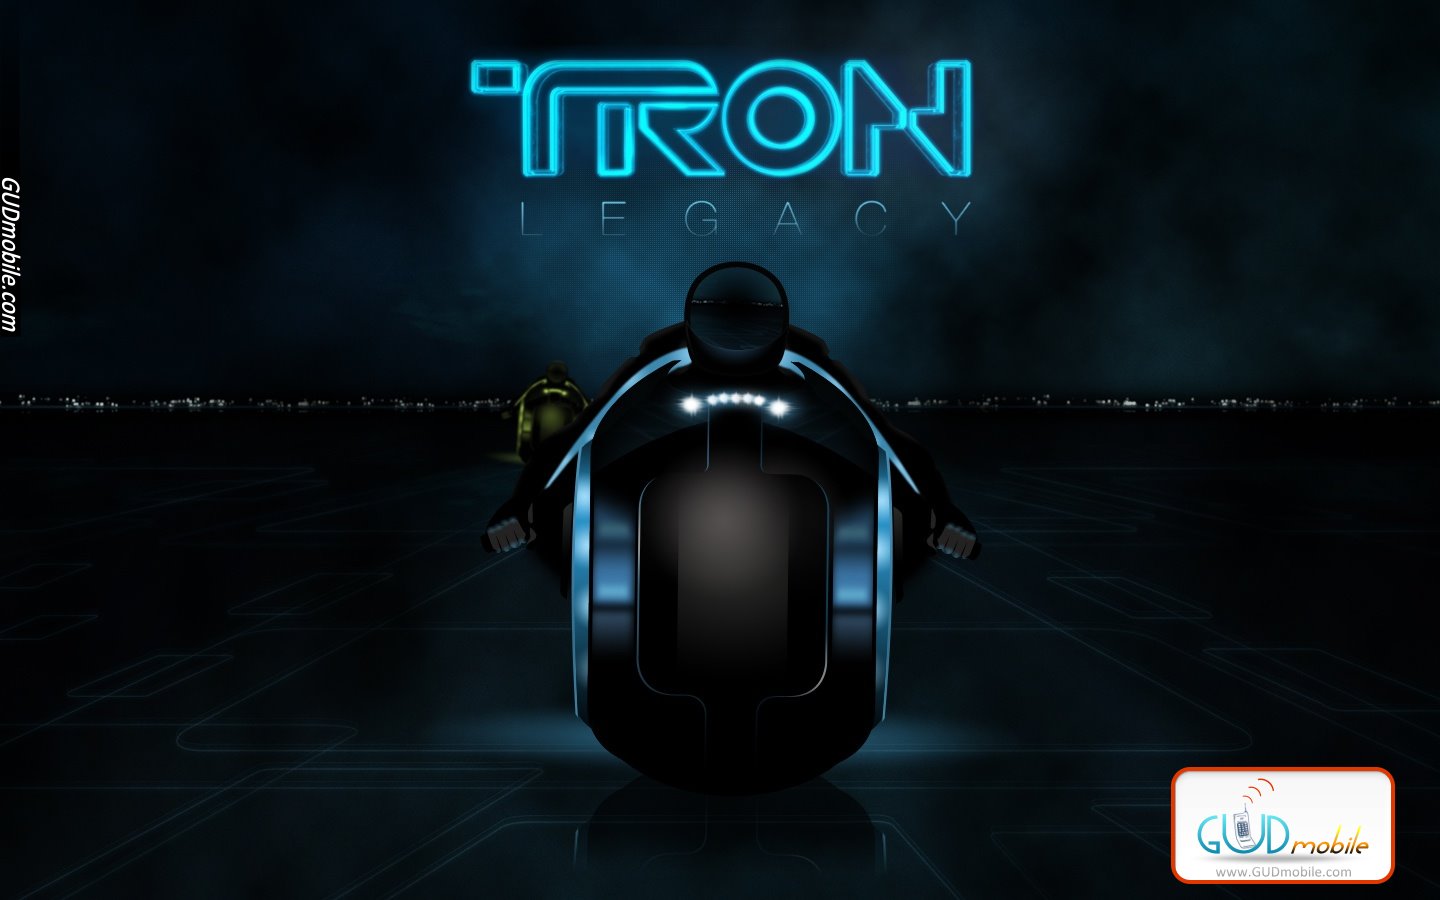 Tron Legacy Poster HD High Resolution Wallpapers and Pictures 1440x900